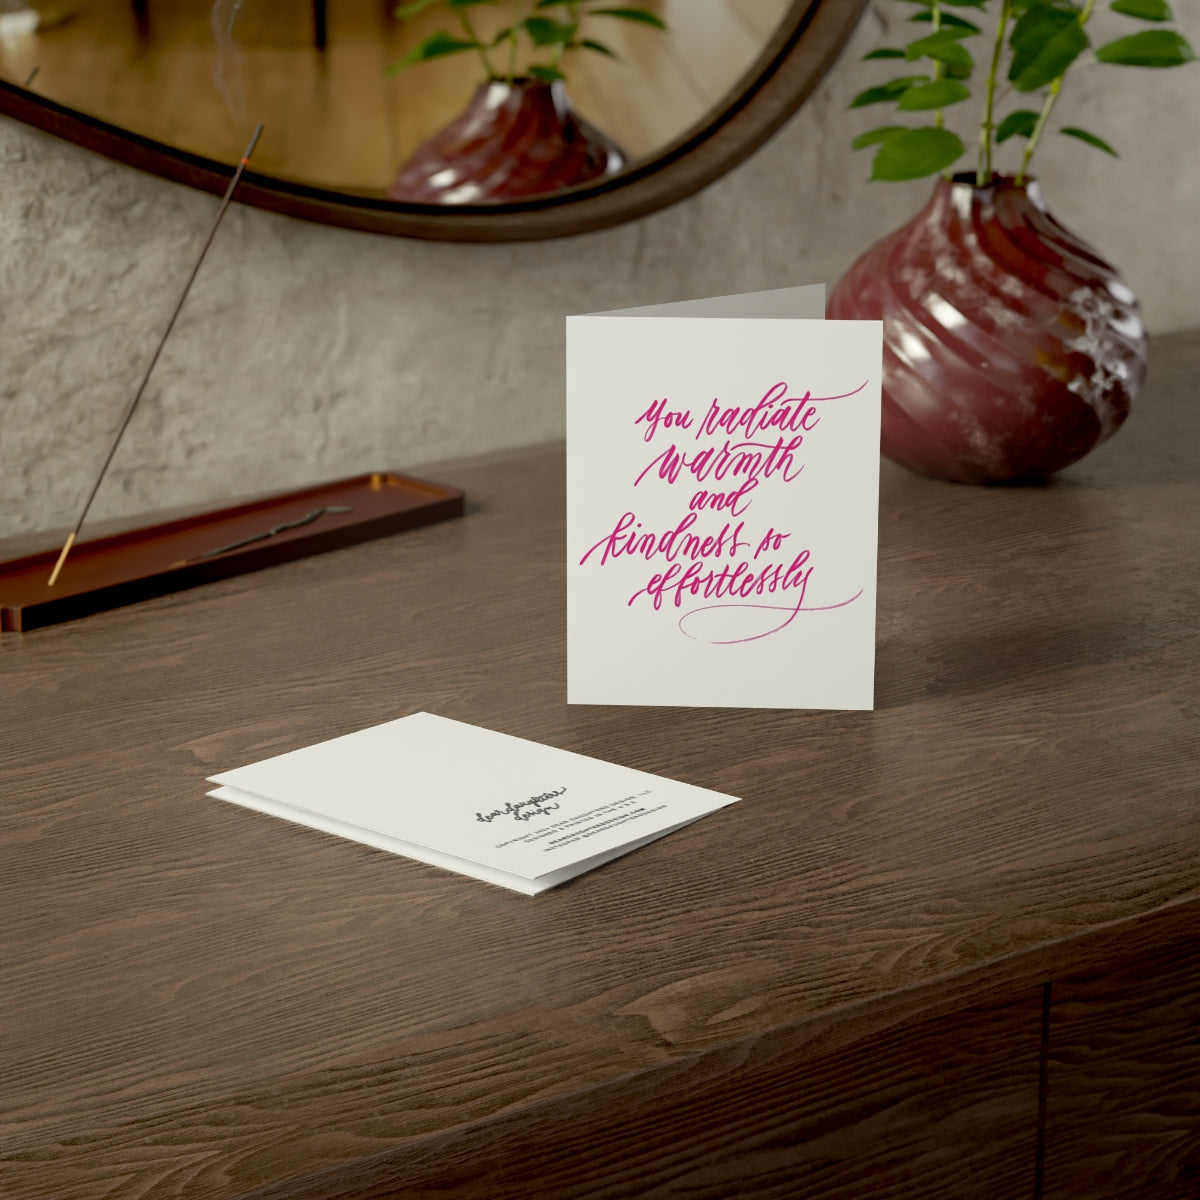 "You radiate warmth & kindness so effortlessly!" Pink Thank You Greeting Card - Gratitude #12